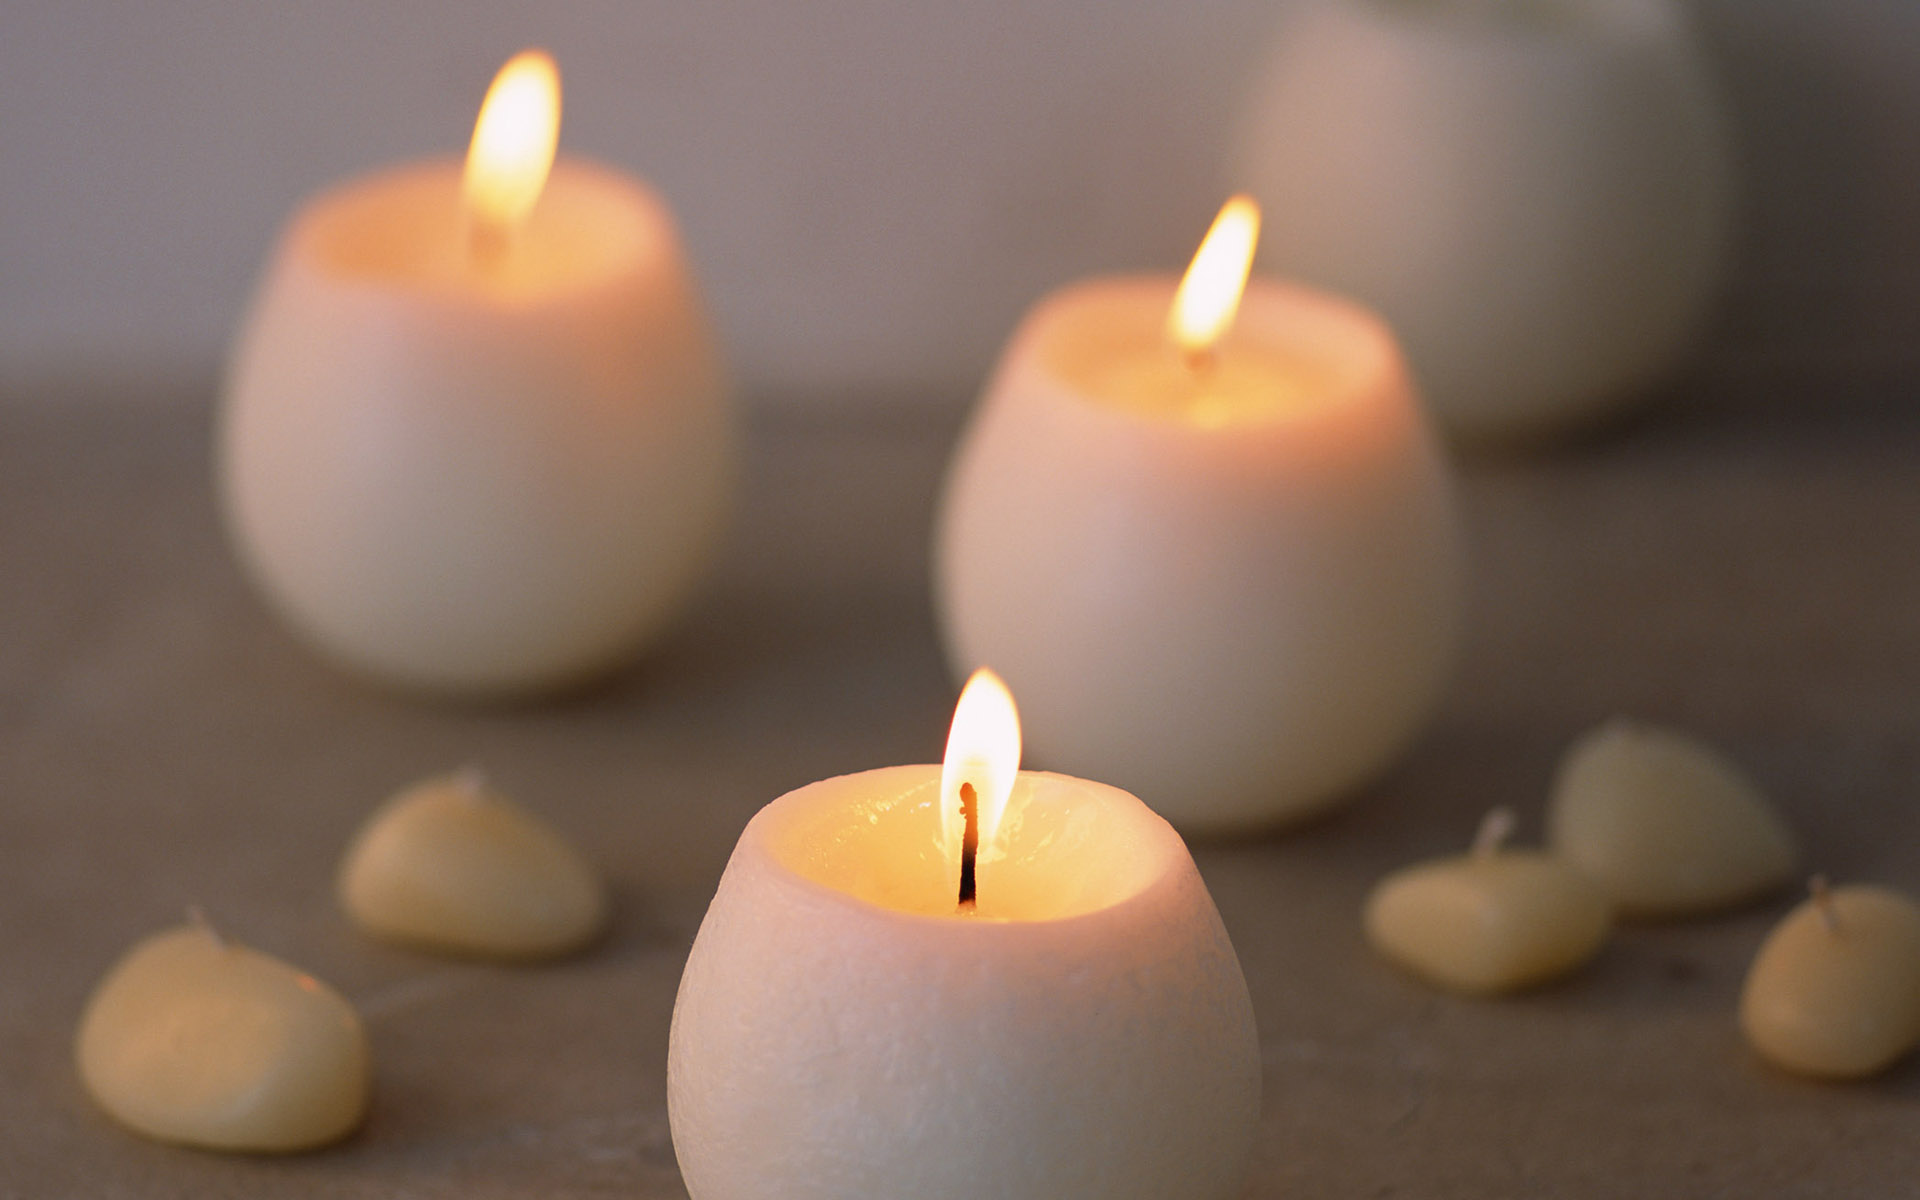 Candle Wallpaper - Candle Images Free Download - 1920x1200 Wallpaper -  